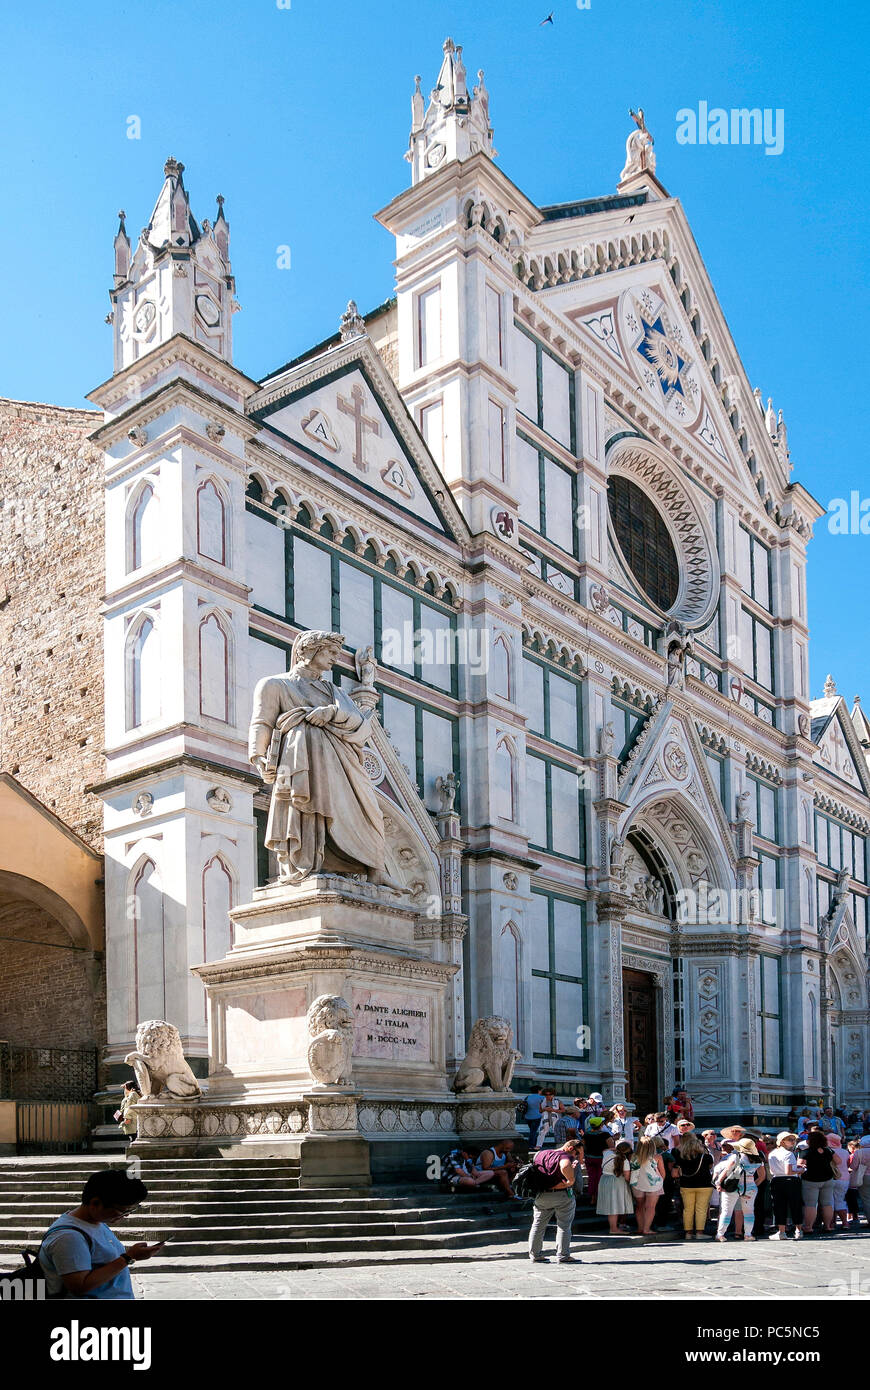 Side view of the Facade of the Cattedrale di Santa Maria del Fiore, Florence, Italy Stock Photo